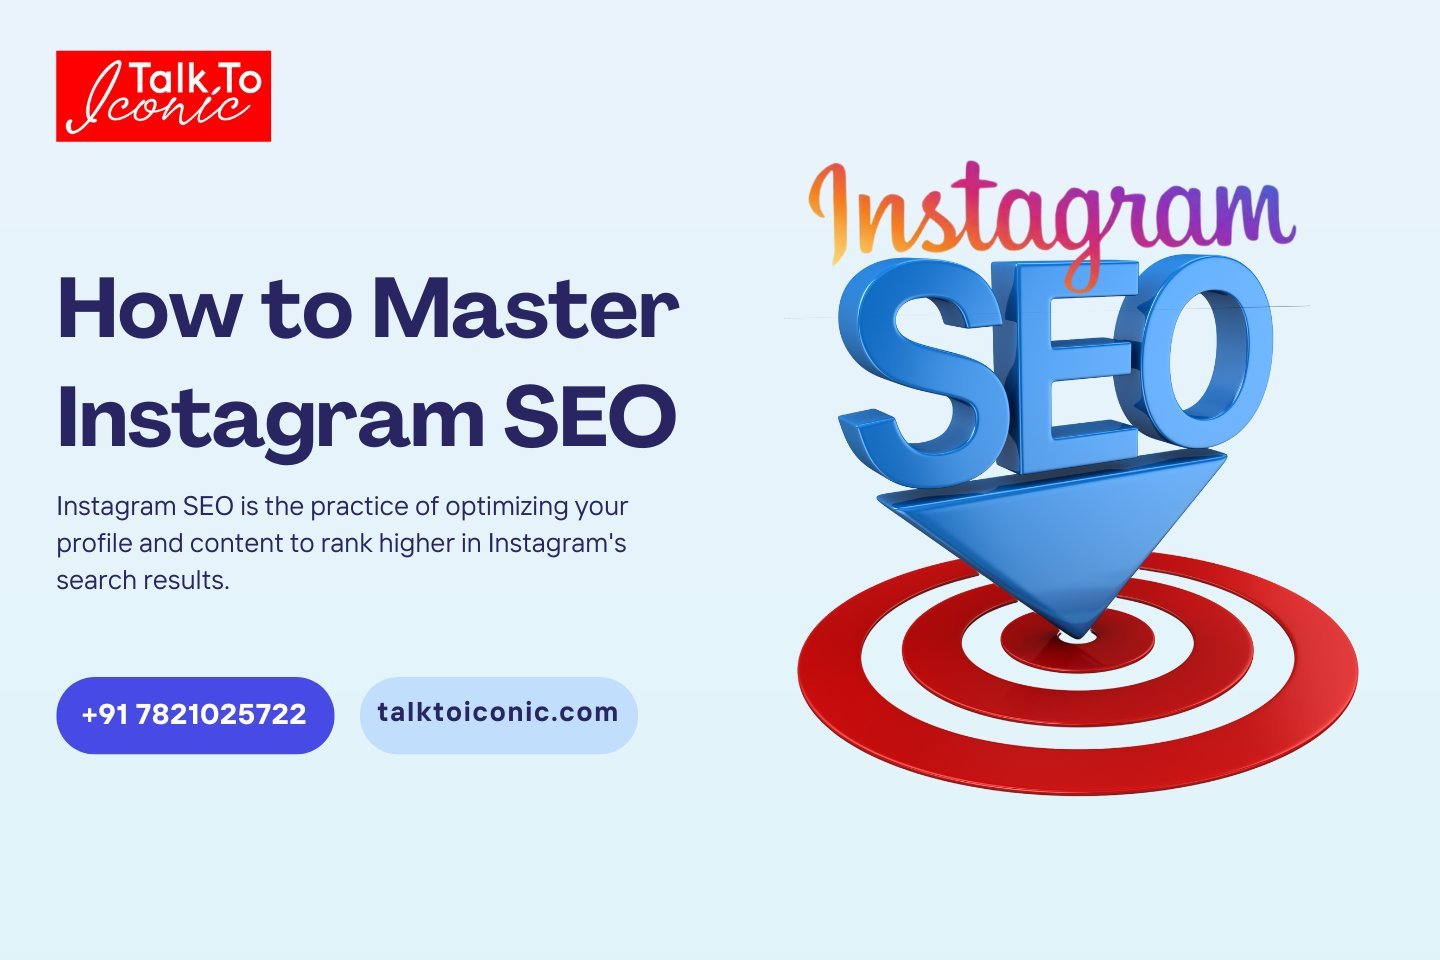 How to Master Instagram SEO